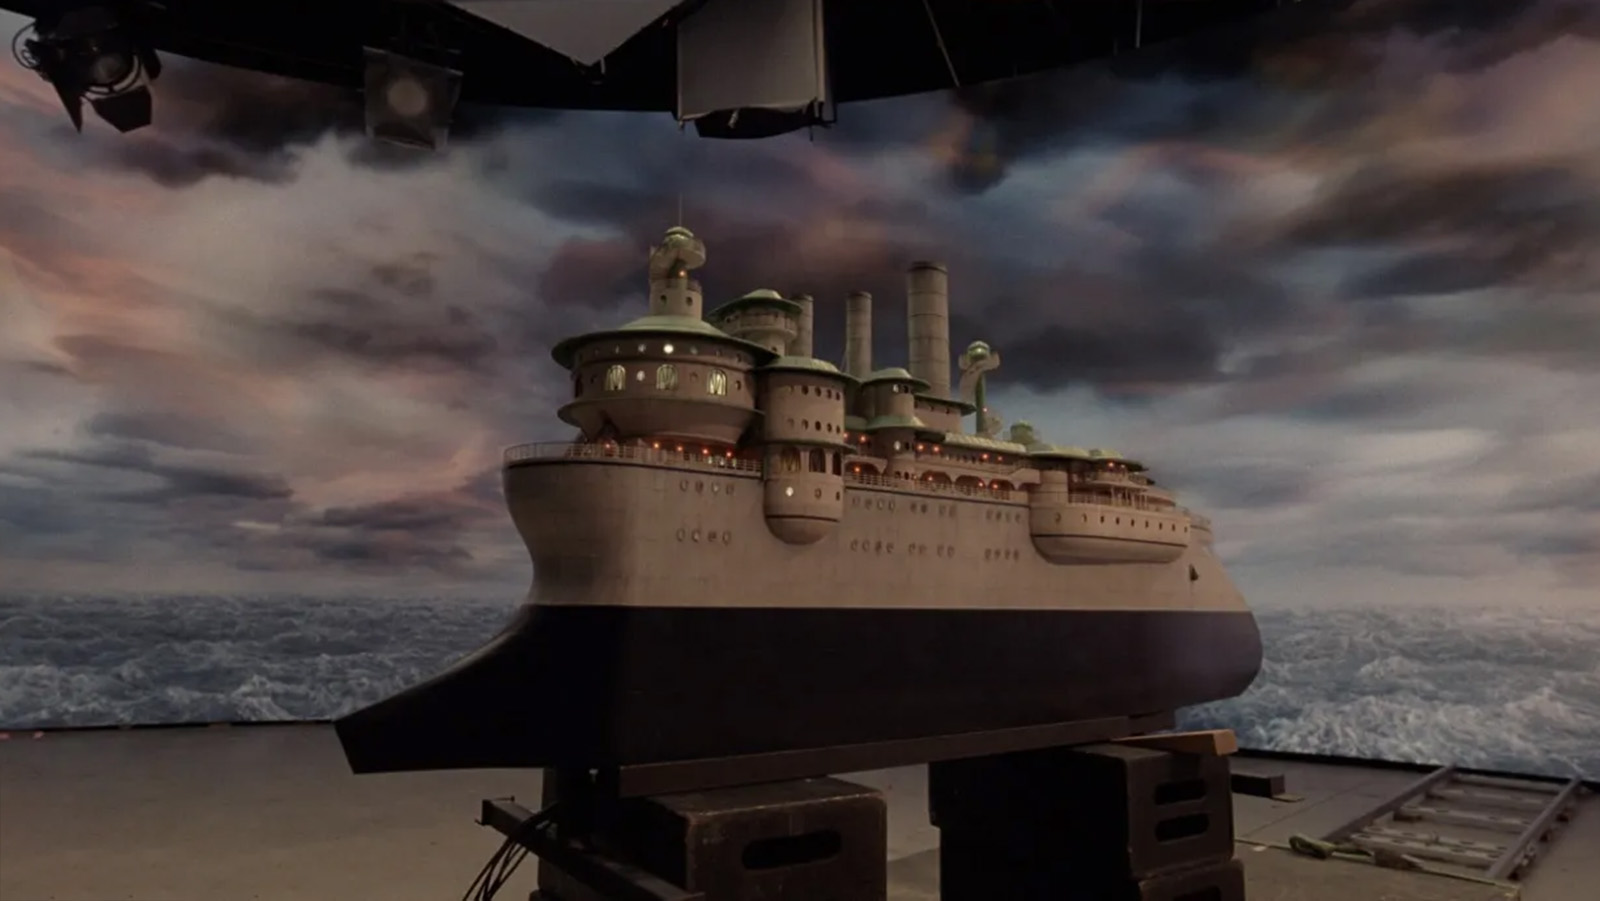 Before and after the VFX work on the miniature ship model in Poor Things. Images © Searchlight Pictures